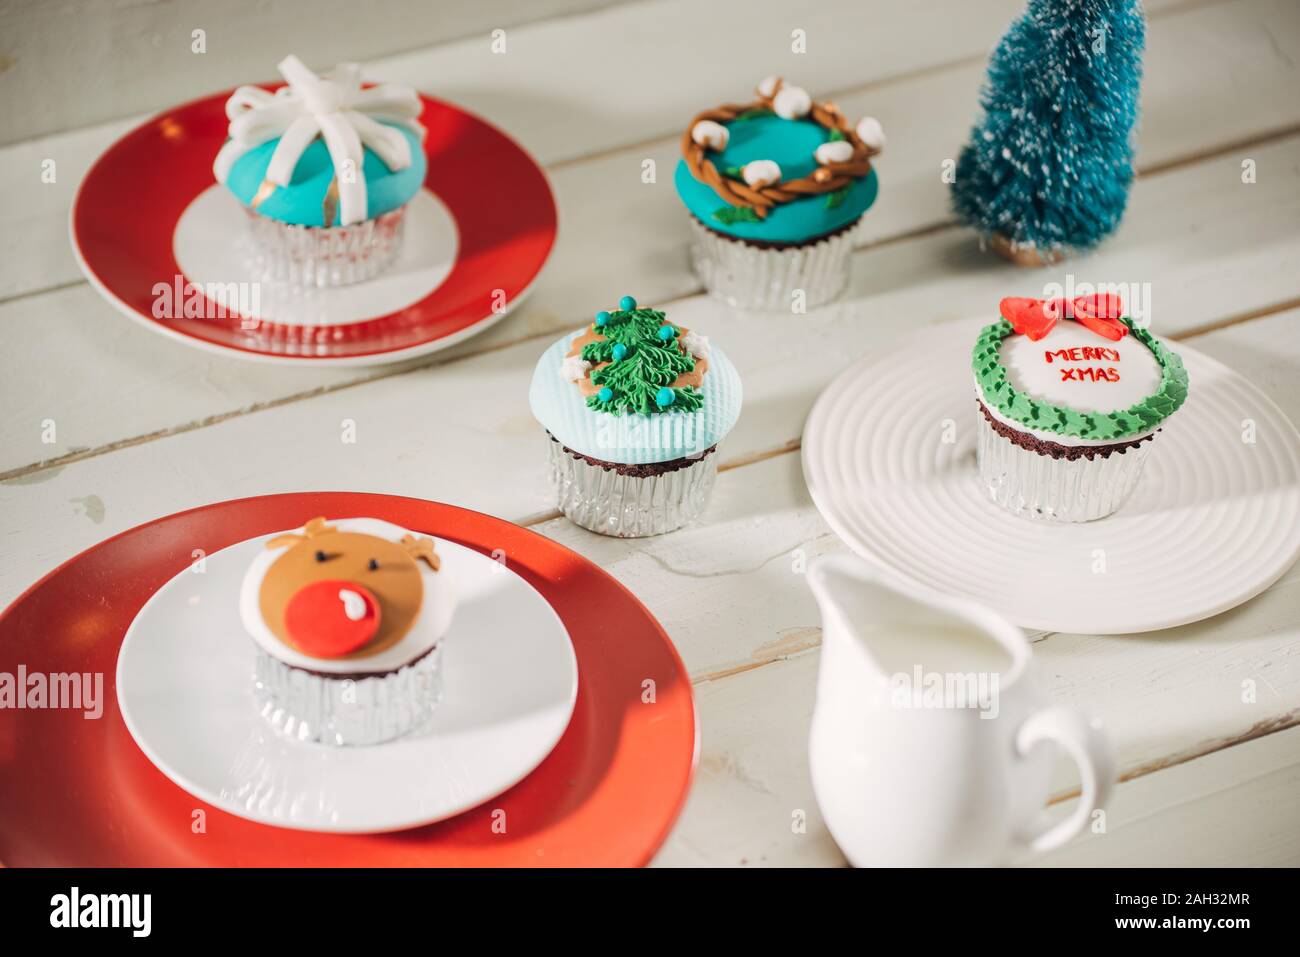 Christmas theme cupcakes in traditional red green colors and candy elements from overhead Stock Photo